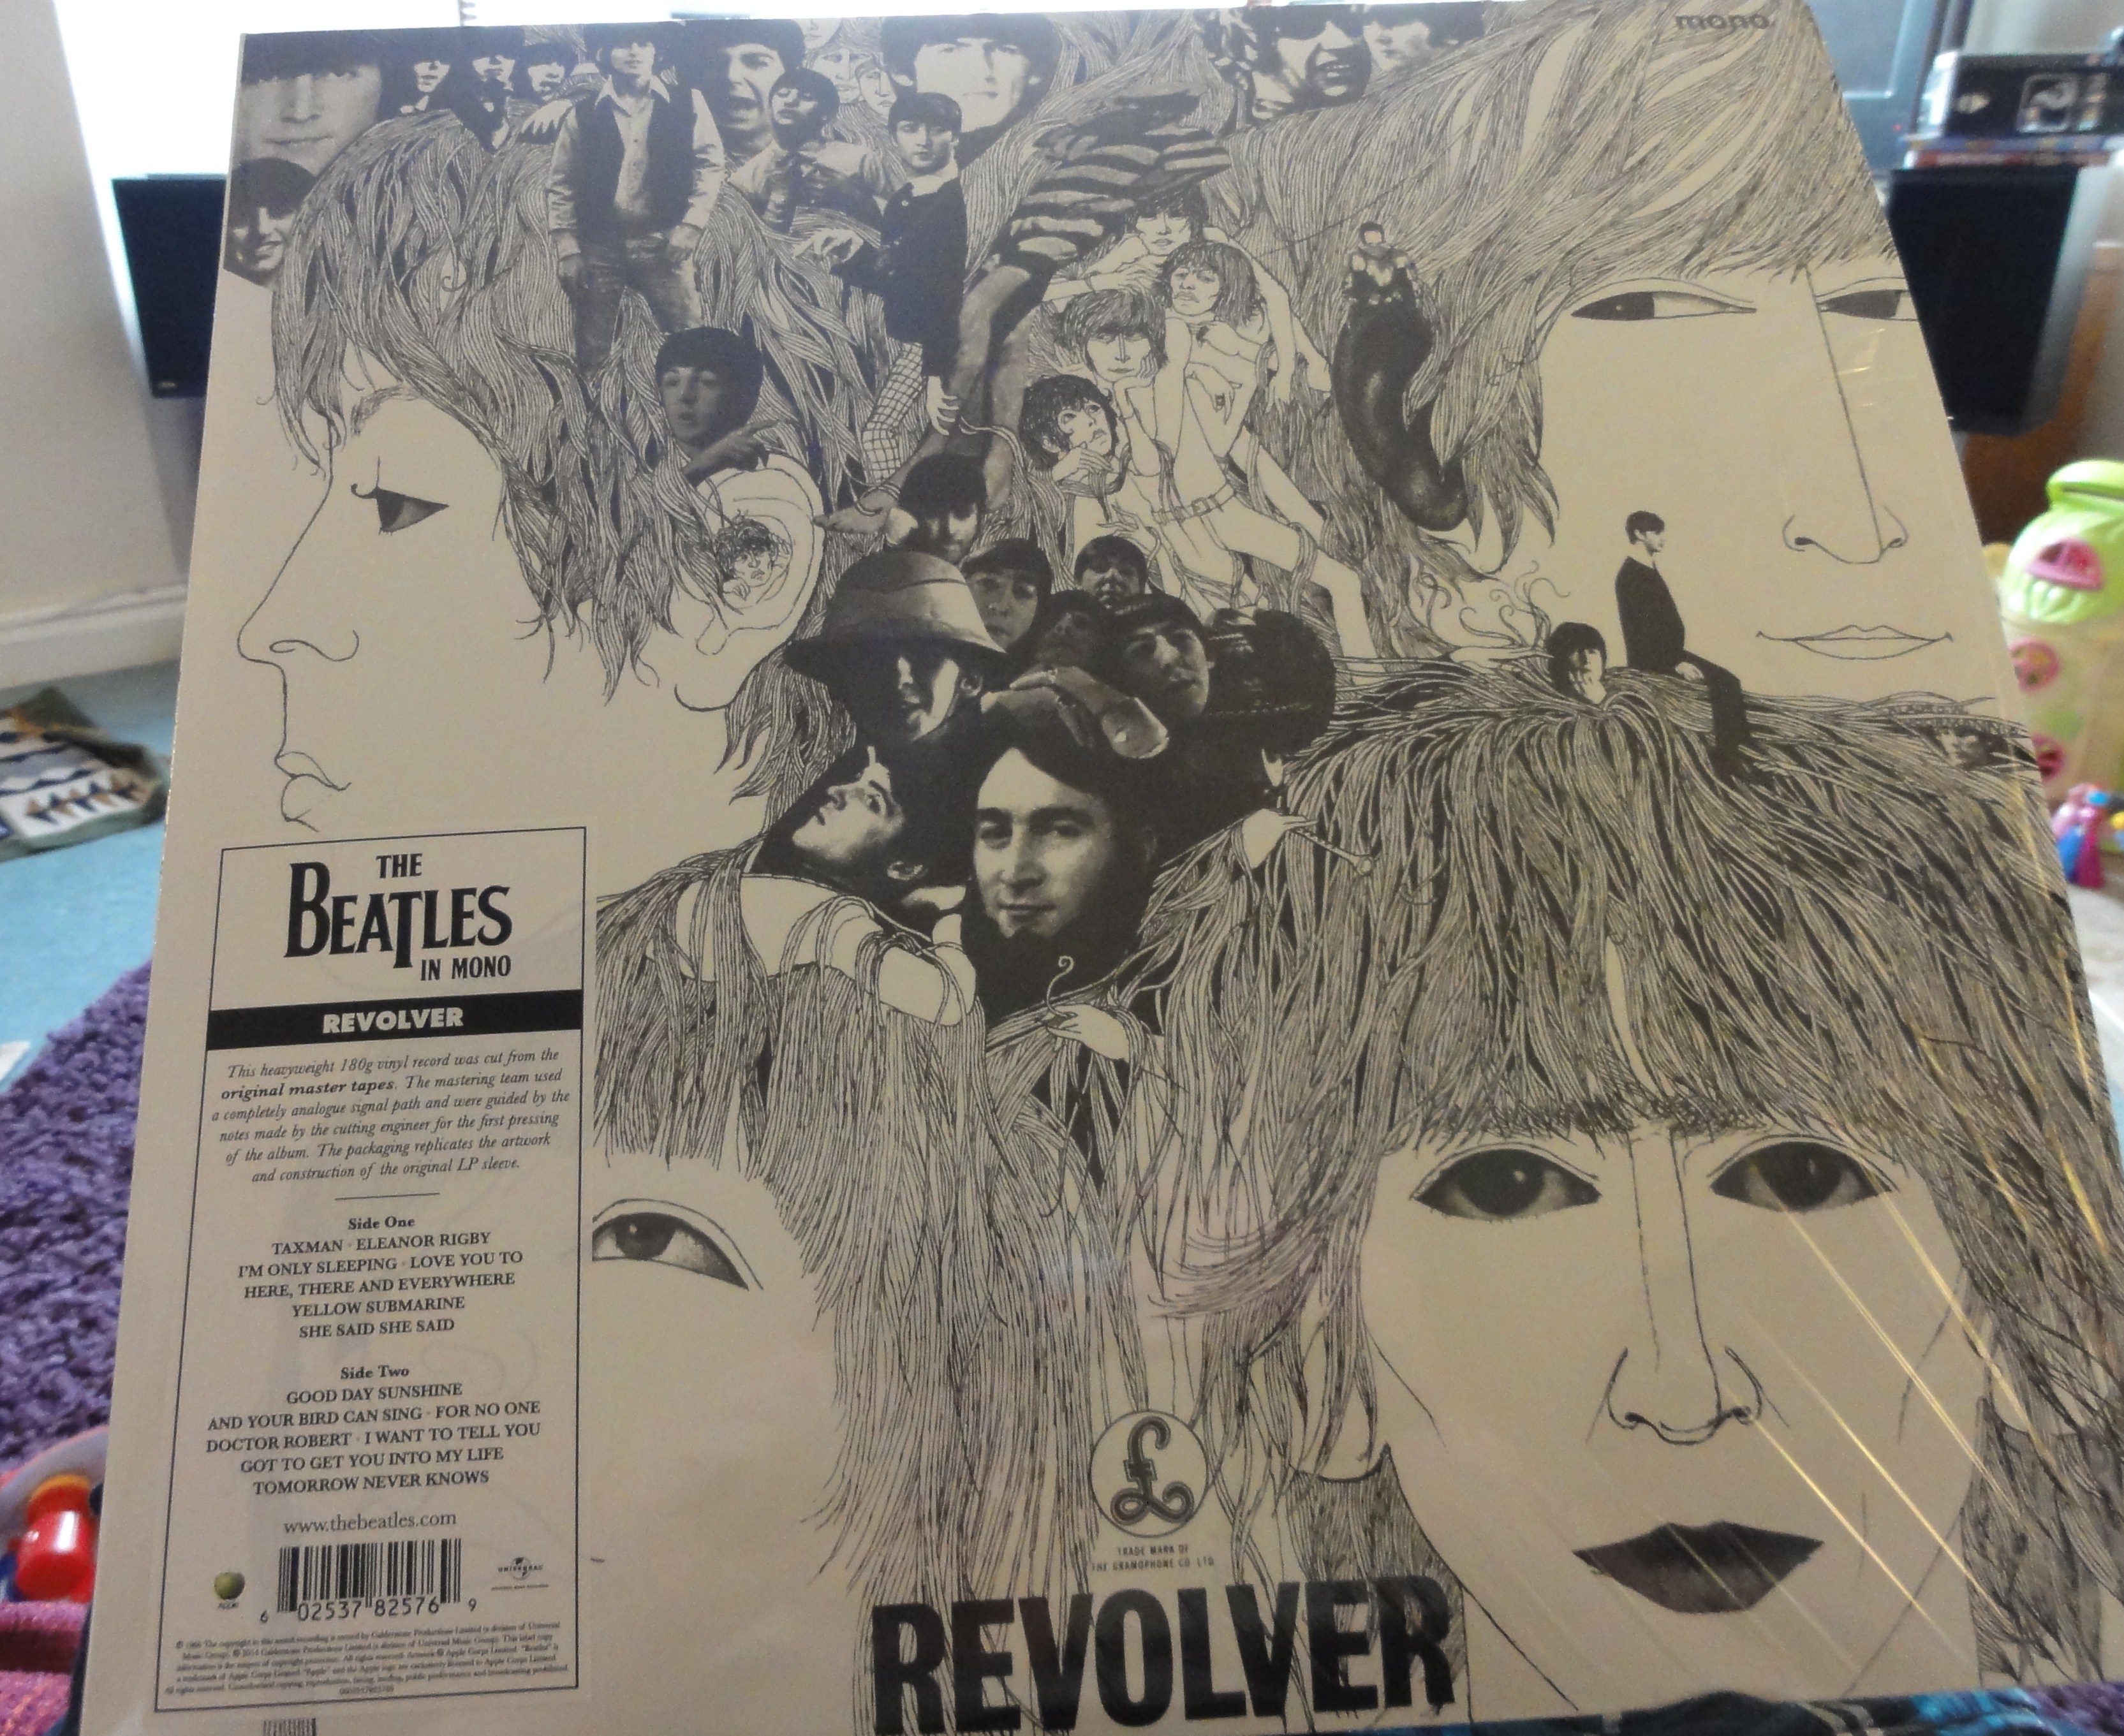 My own spin on The Beatles' remastered 'Revolver' in mono | Ad's